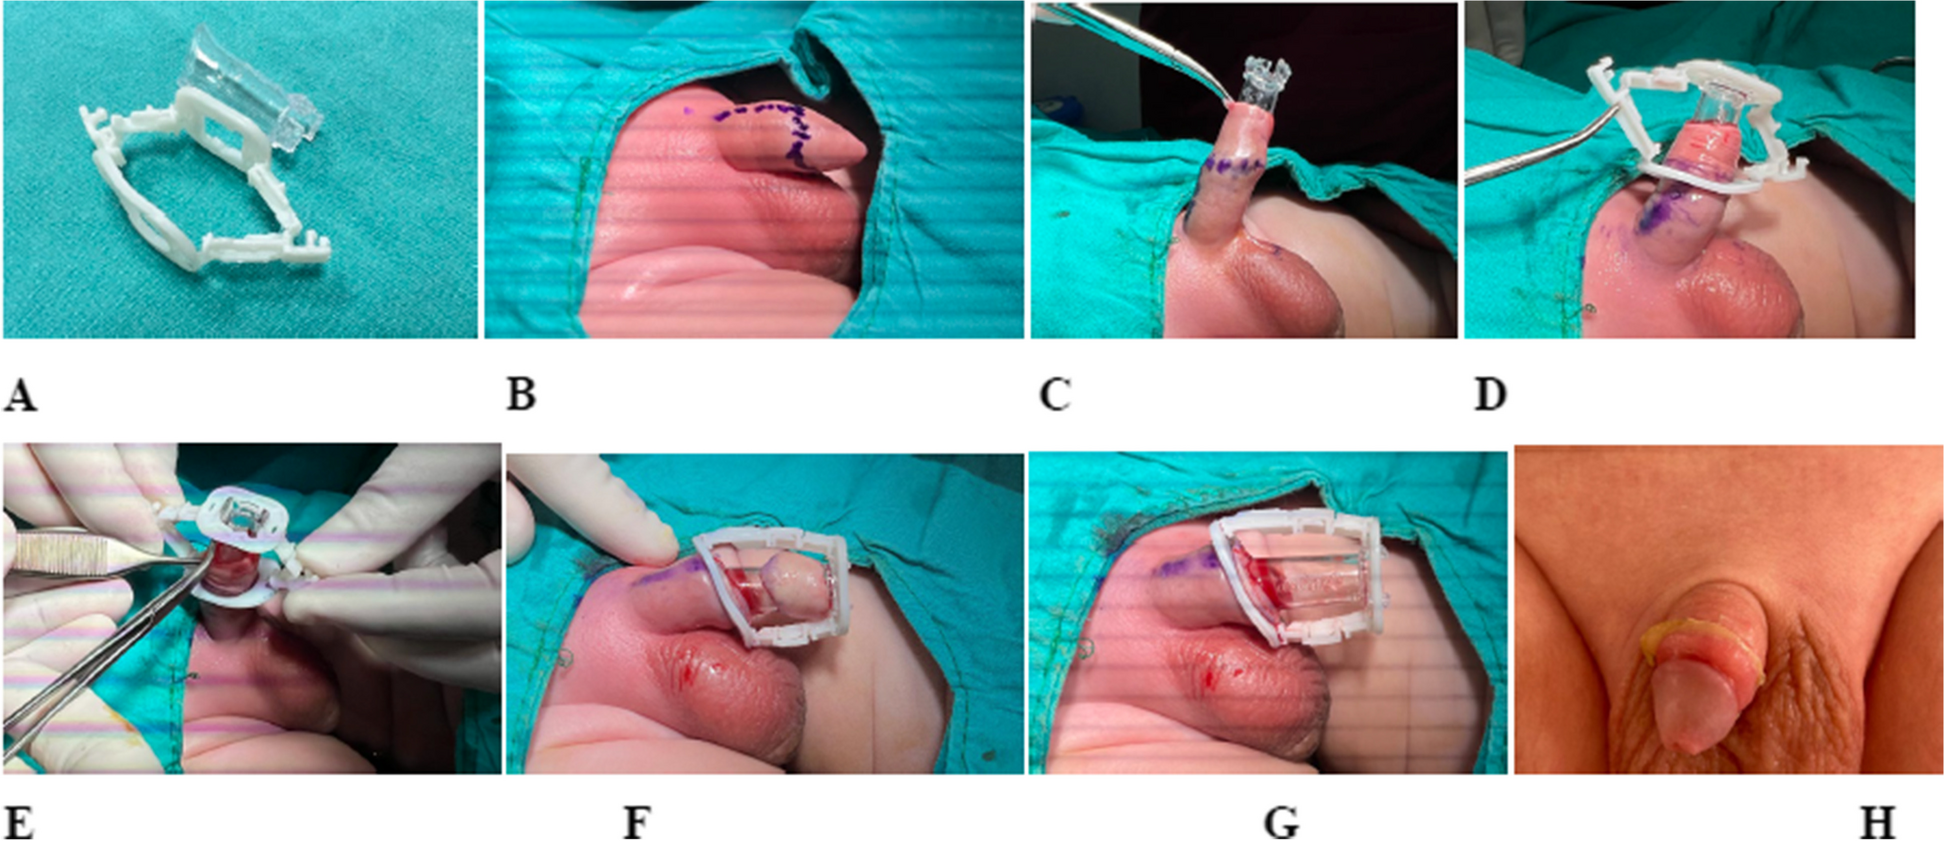 Comparative analysis of two methods in circumcision: a new disposable device versus classic sleeve technique